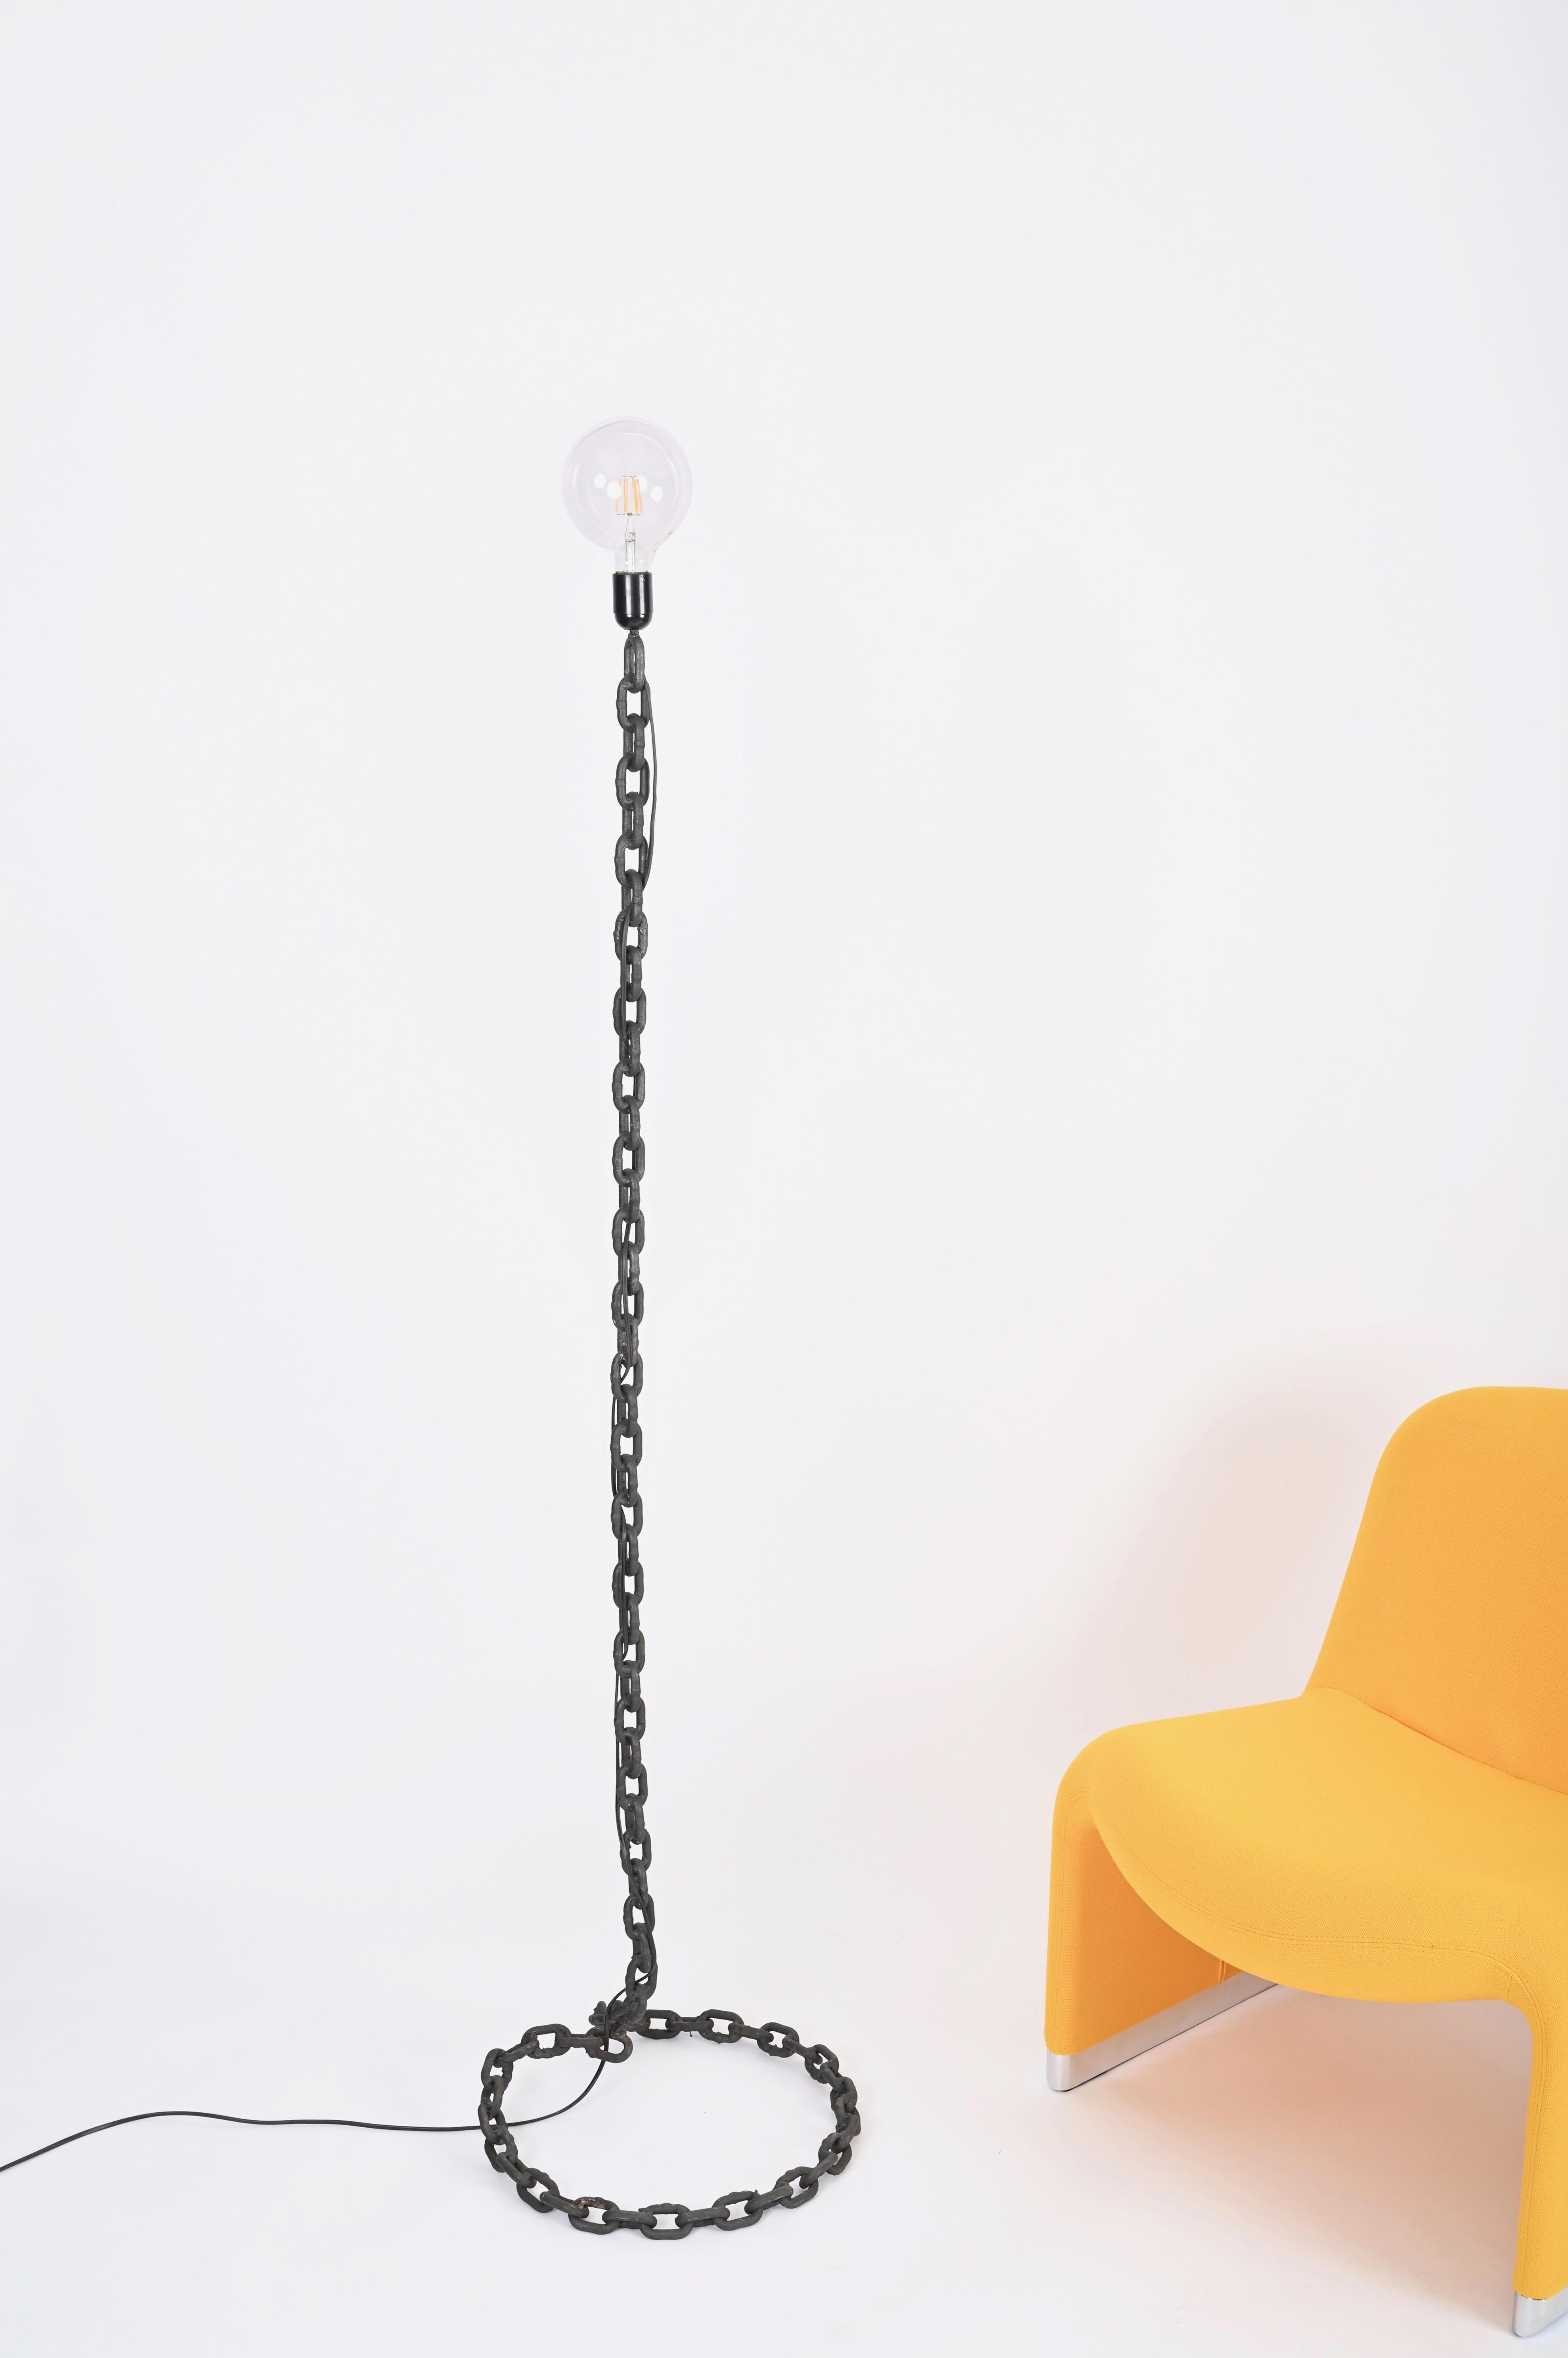 Franz West Brutalist Midcentury Chain Floor Lamp, Italy 1970s  For Sale 2